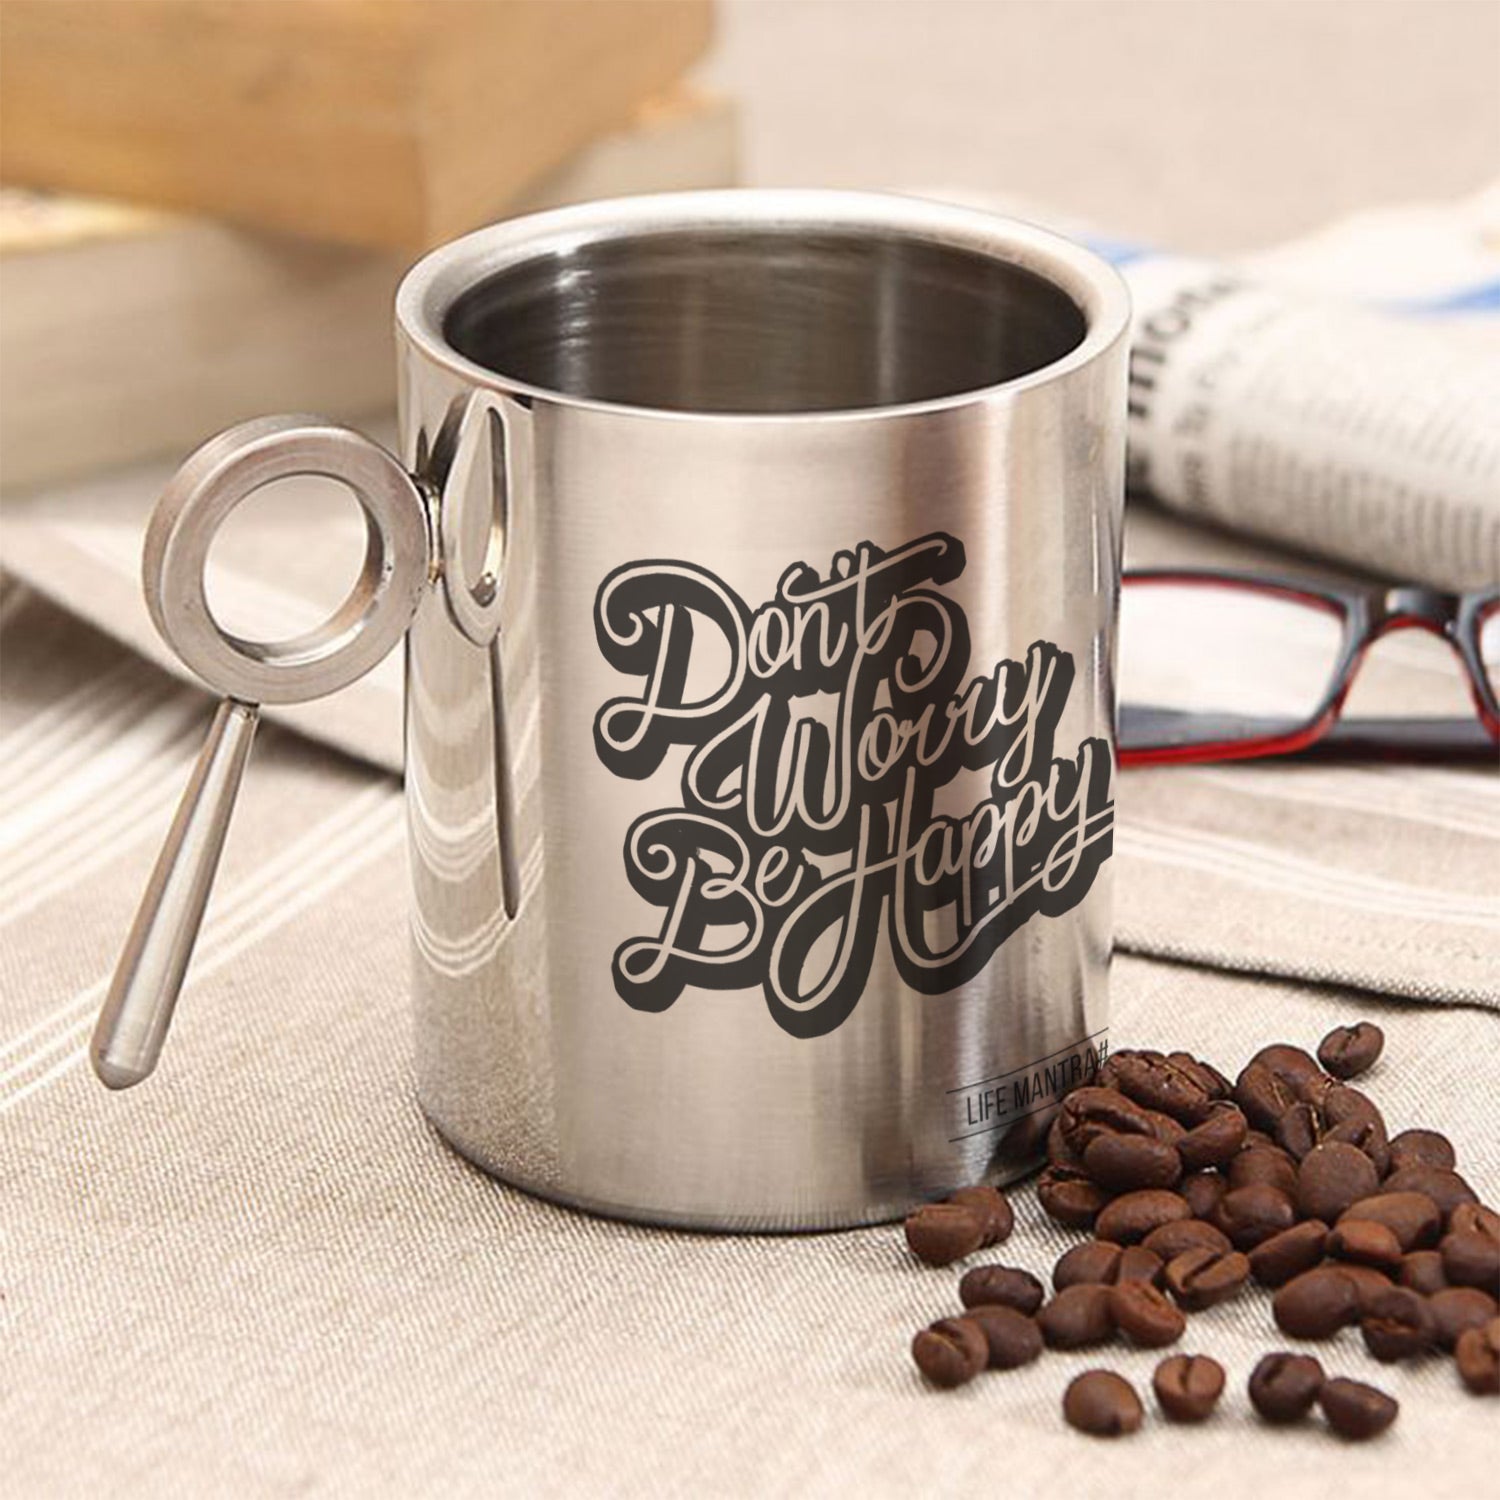 Don't Worry - Use Your Own Mug